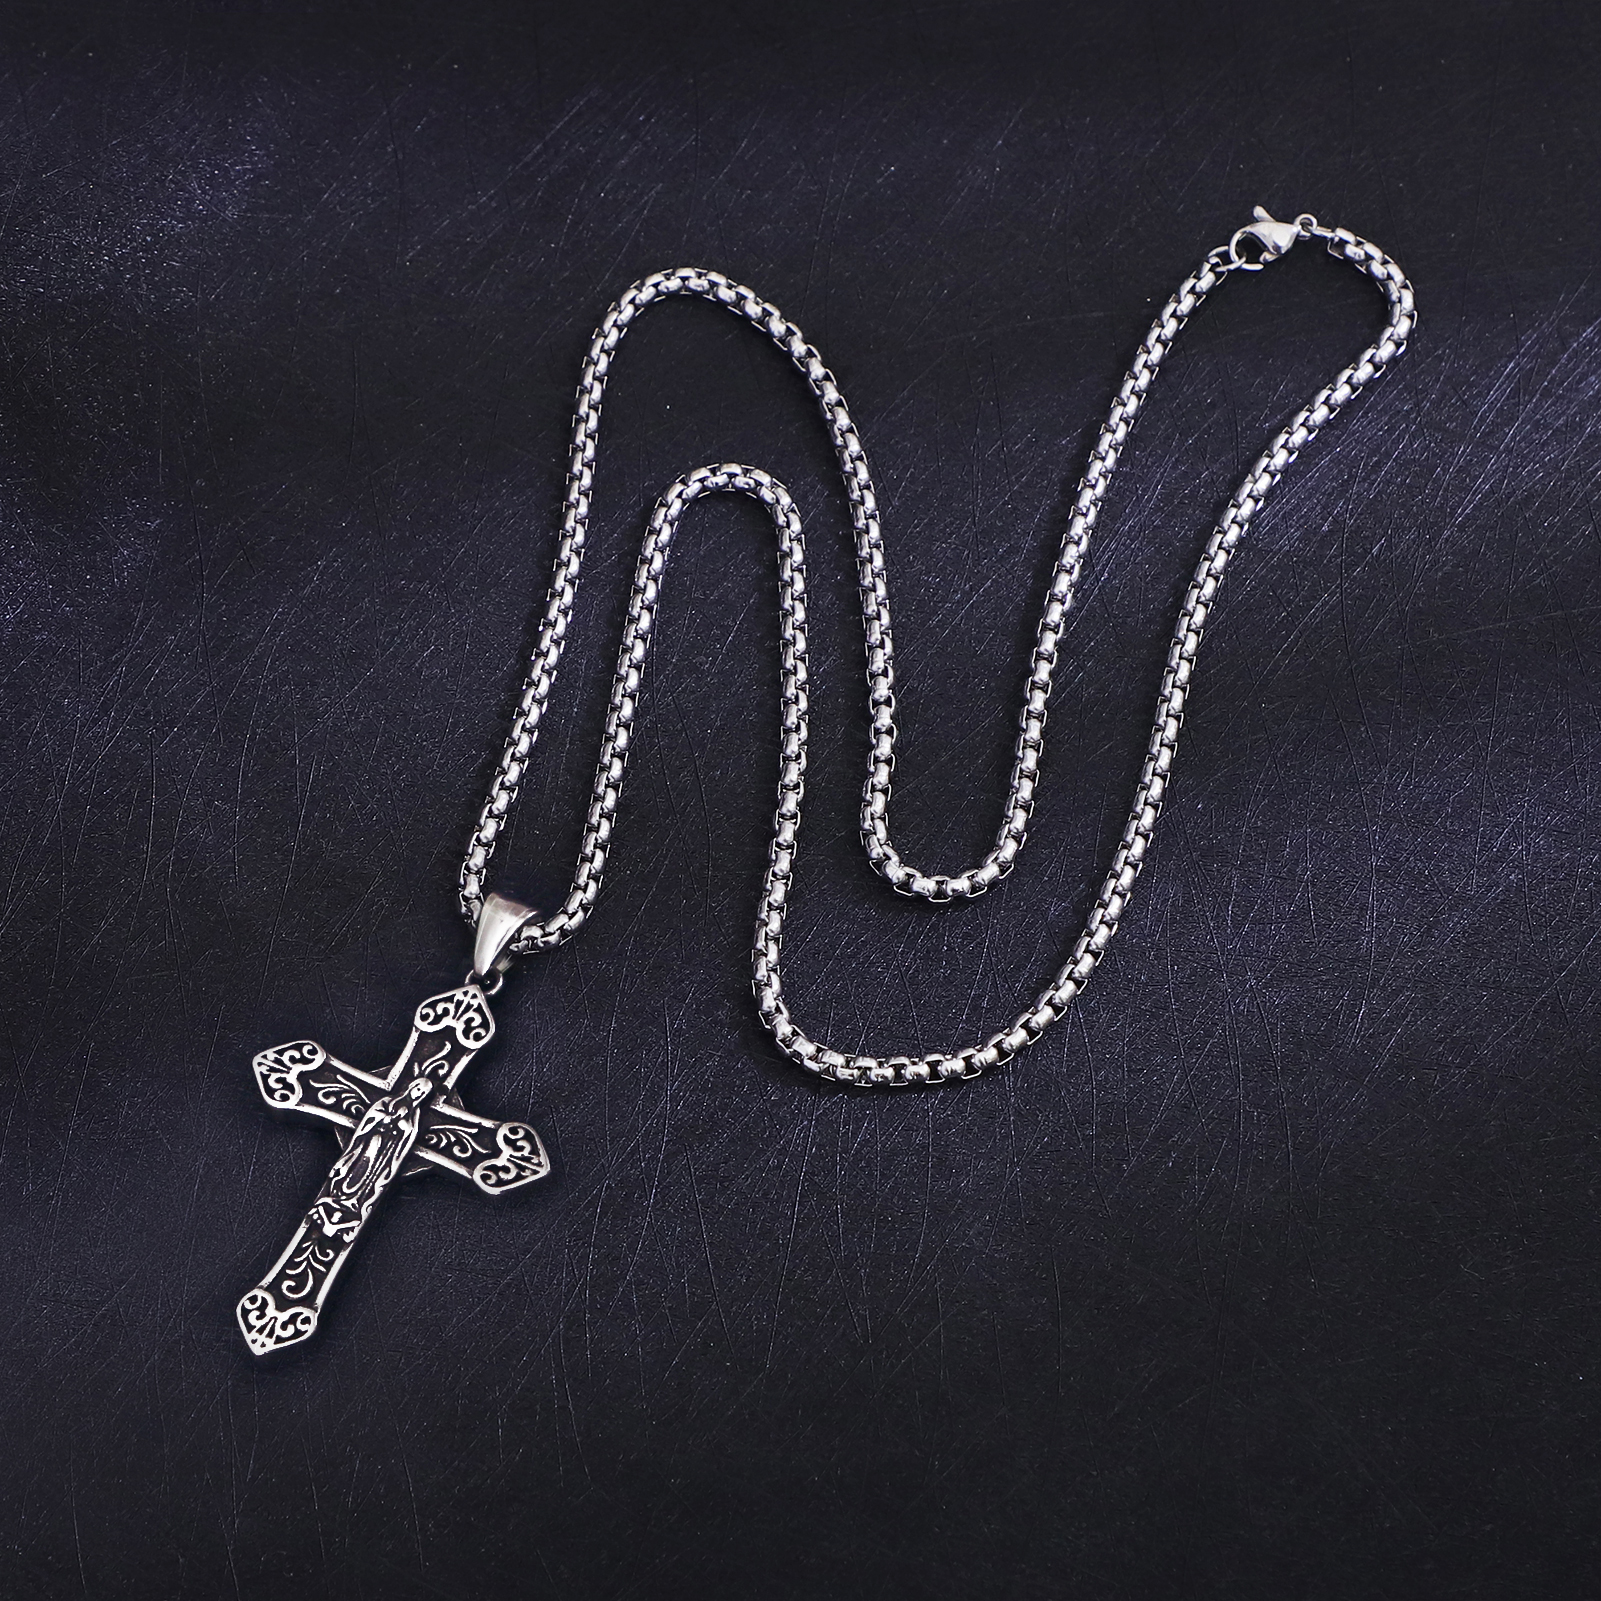 Stainless Steel Holy Virgin Mary Cross Necklace